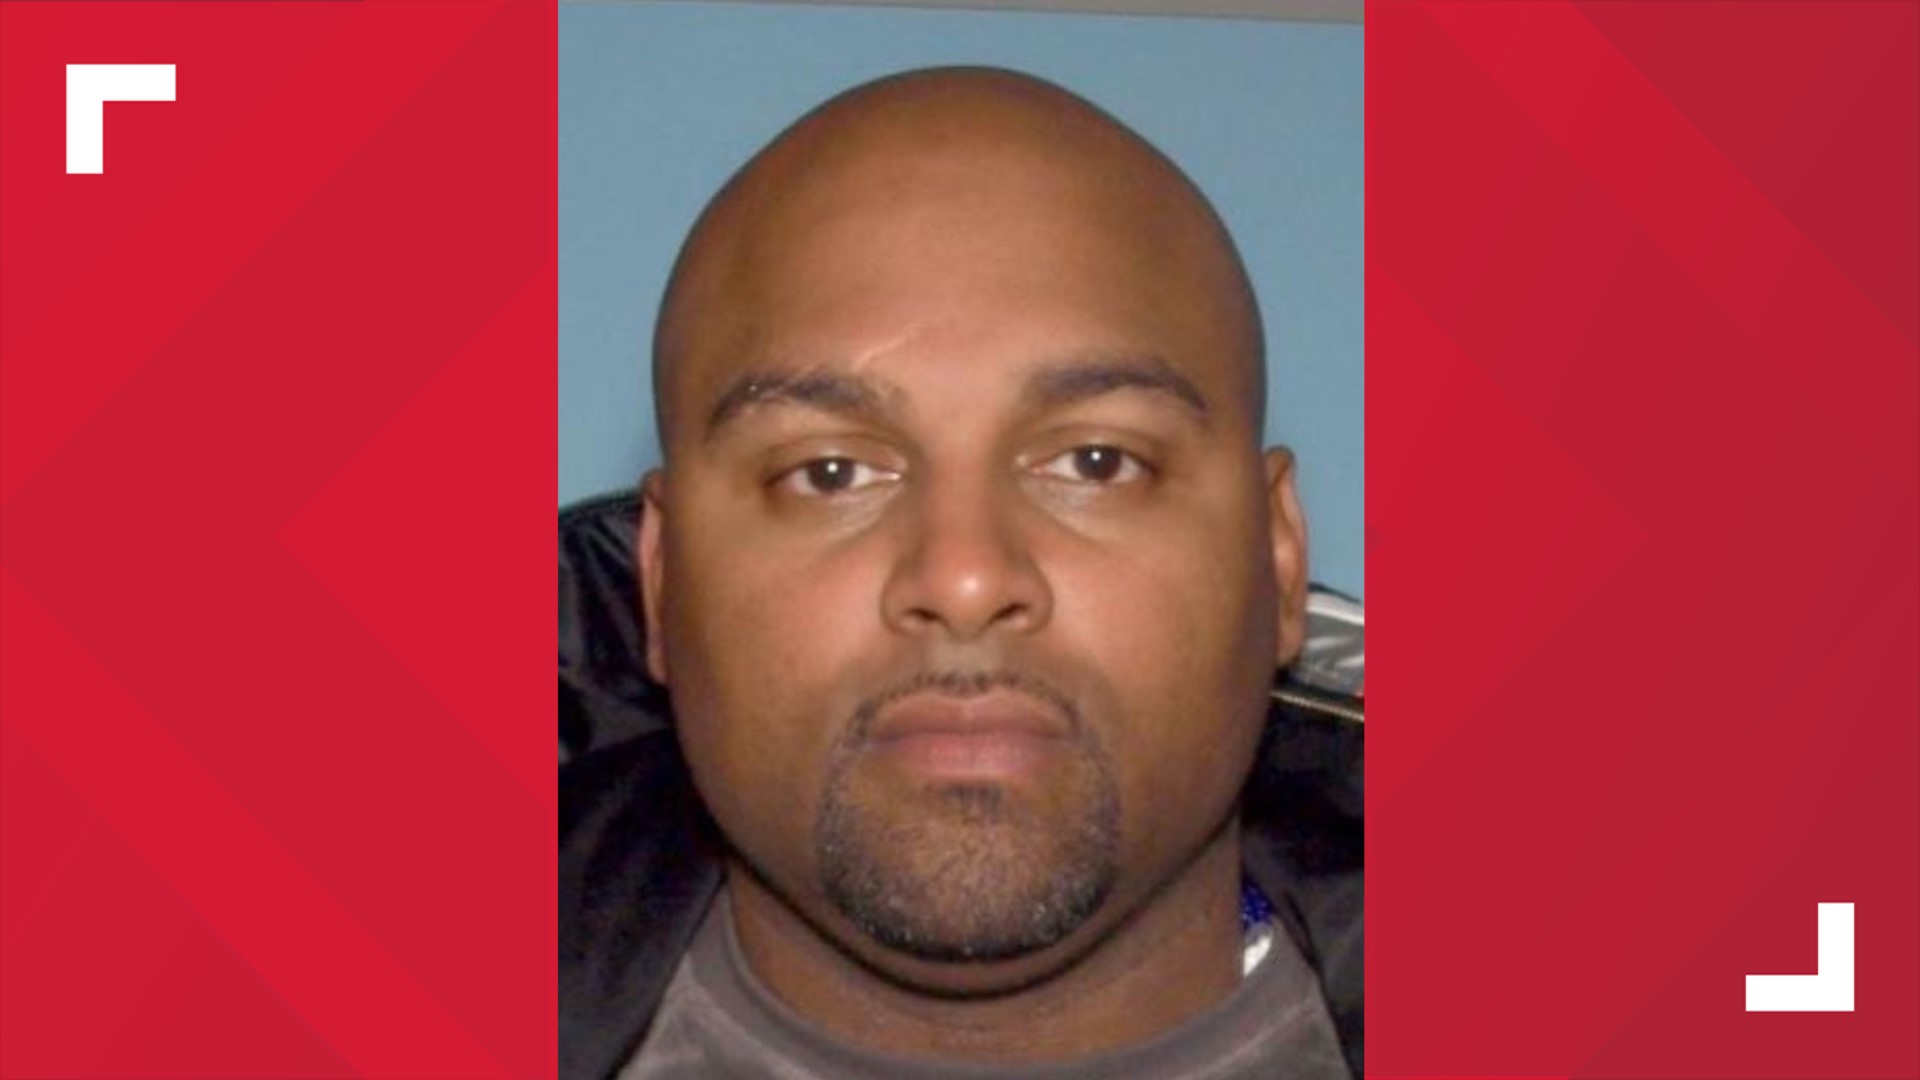 APD said Wednesday that they're looking for 39-year-old Jonathan David Soto.